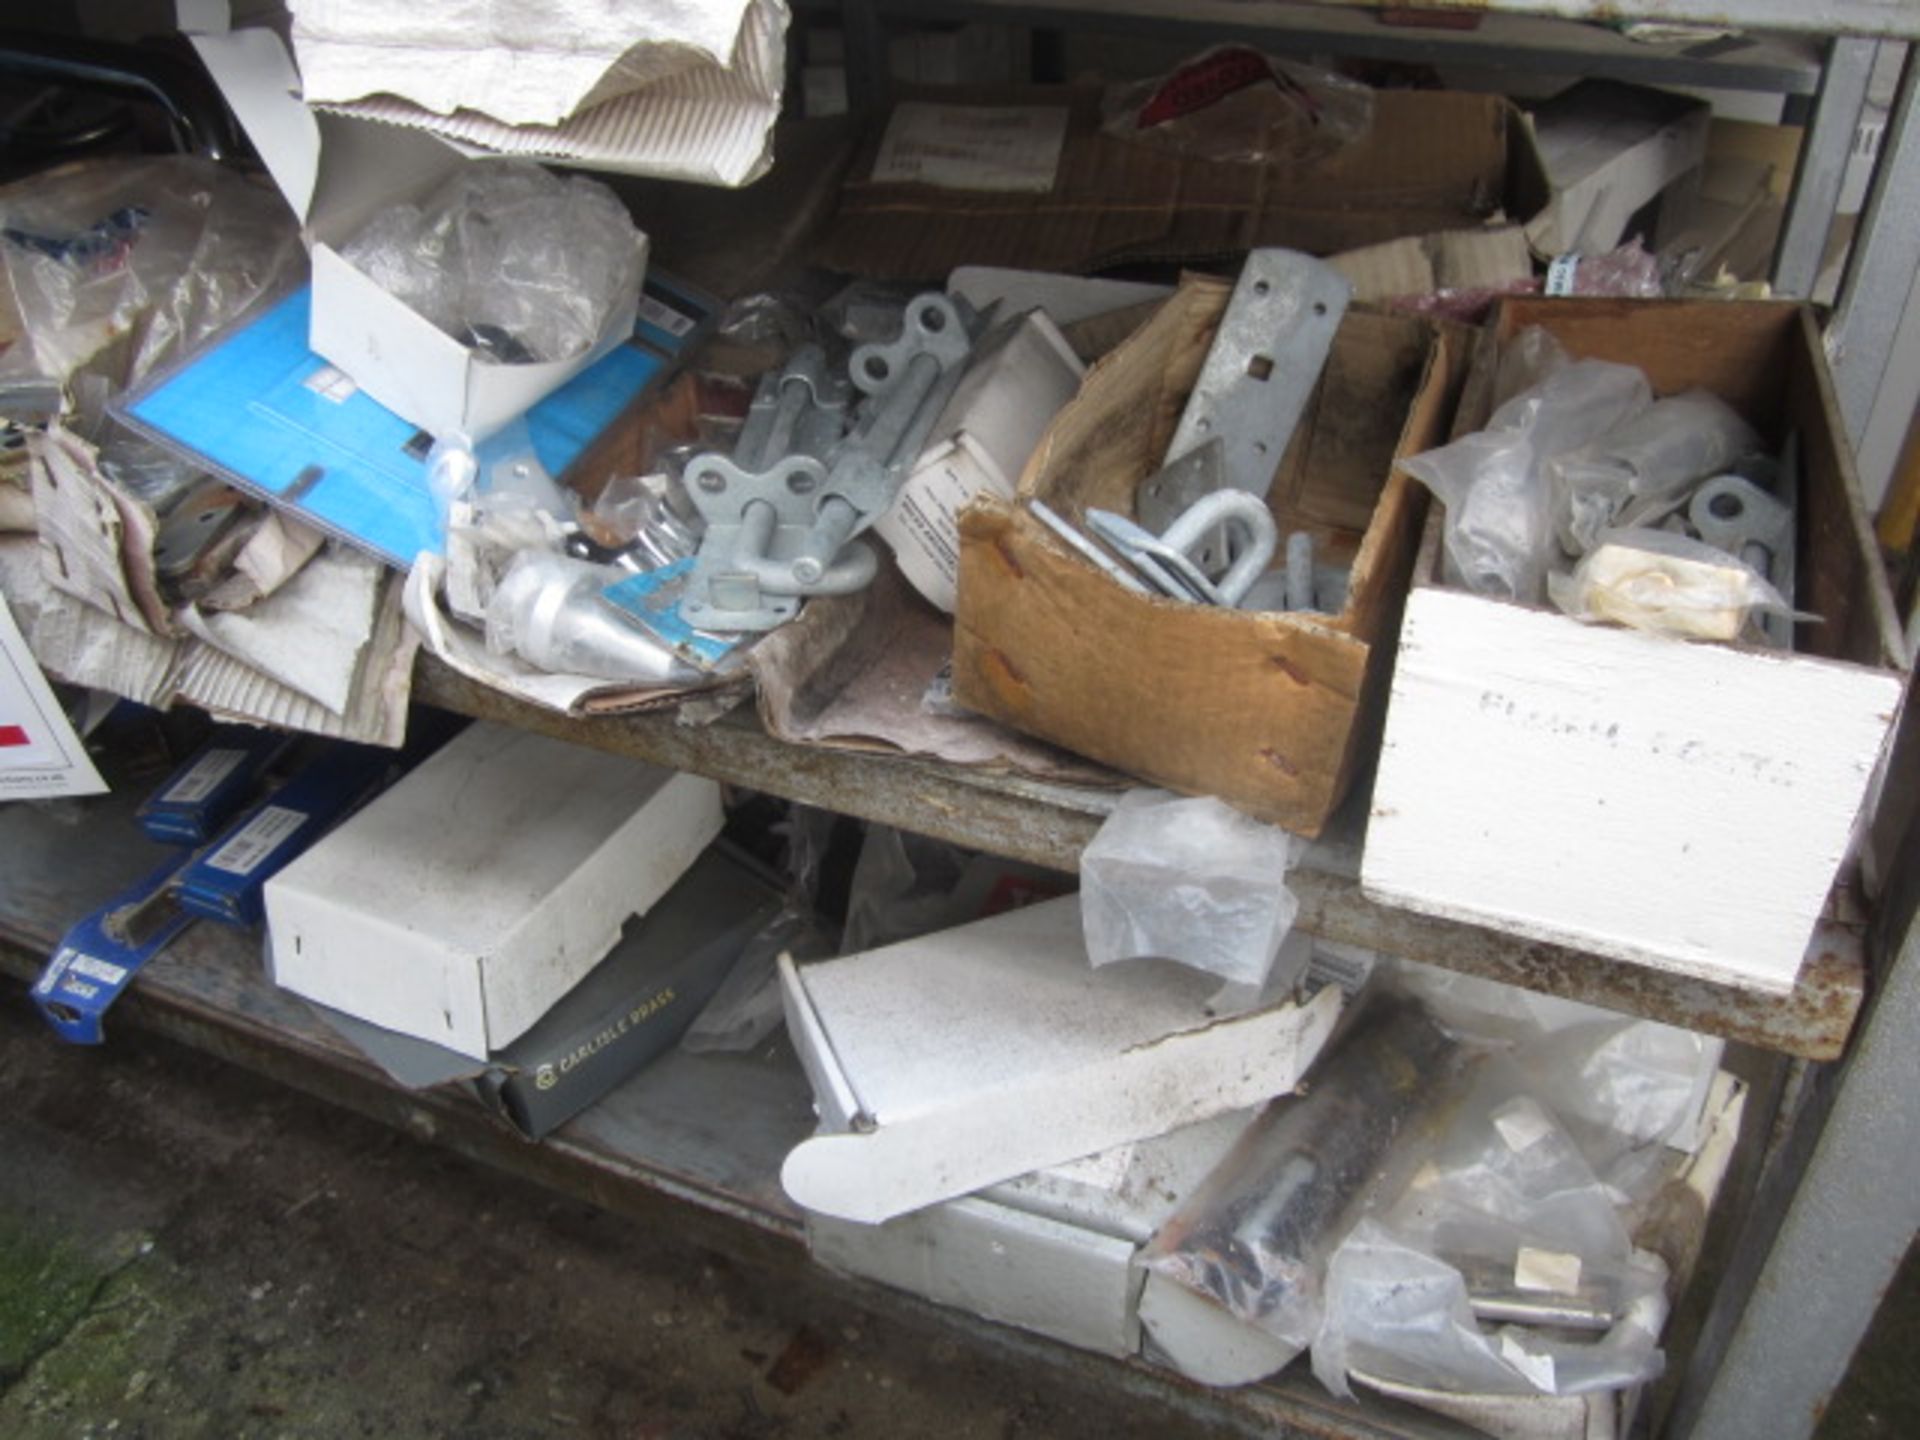 Contents of racking including locks, hangers, ironmongery, bolts, architectural hardwear etc. - Image 2 of 18